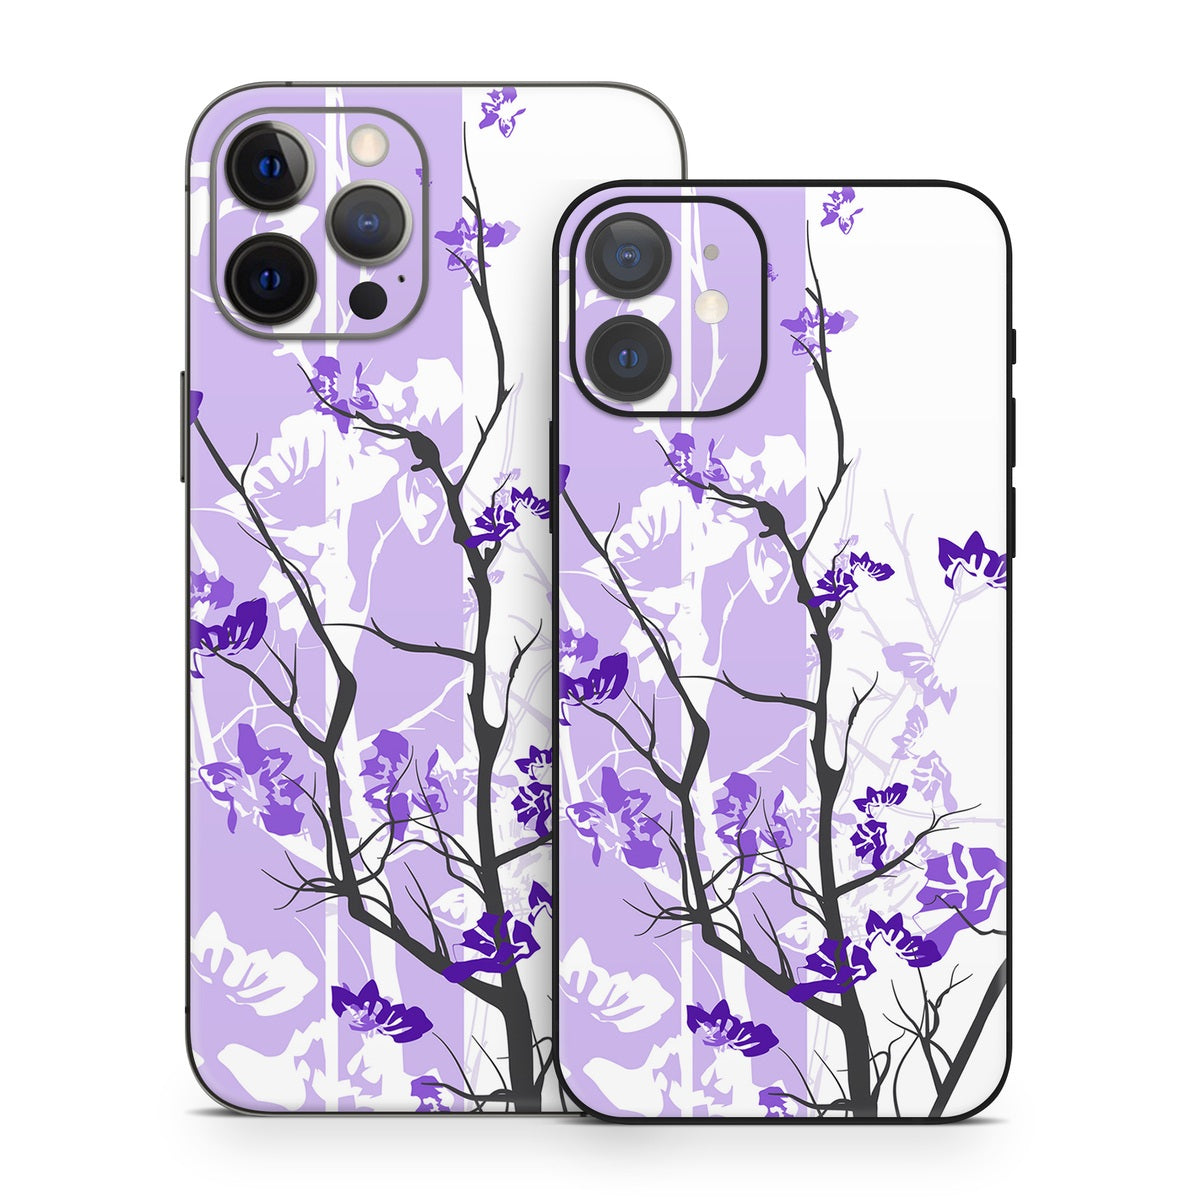 Violet Tranquility - Apple iPhone 12 Skin